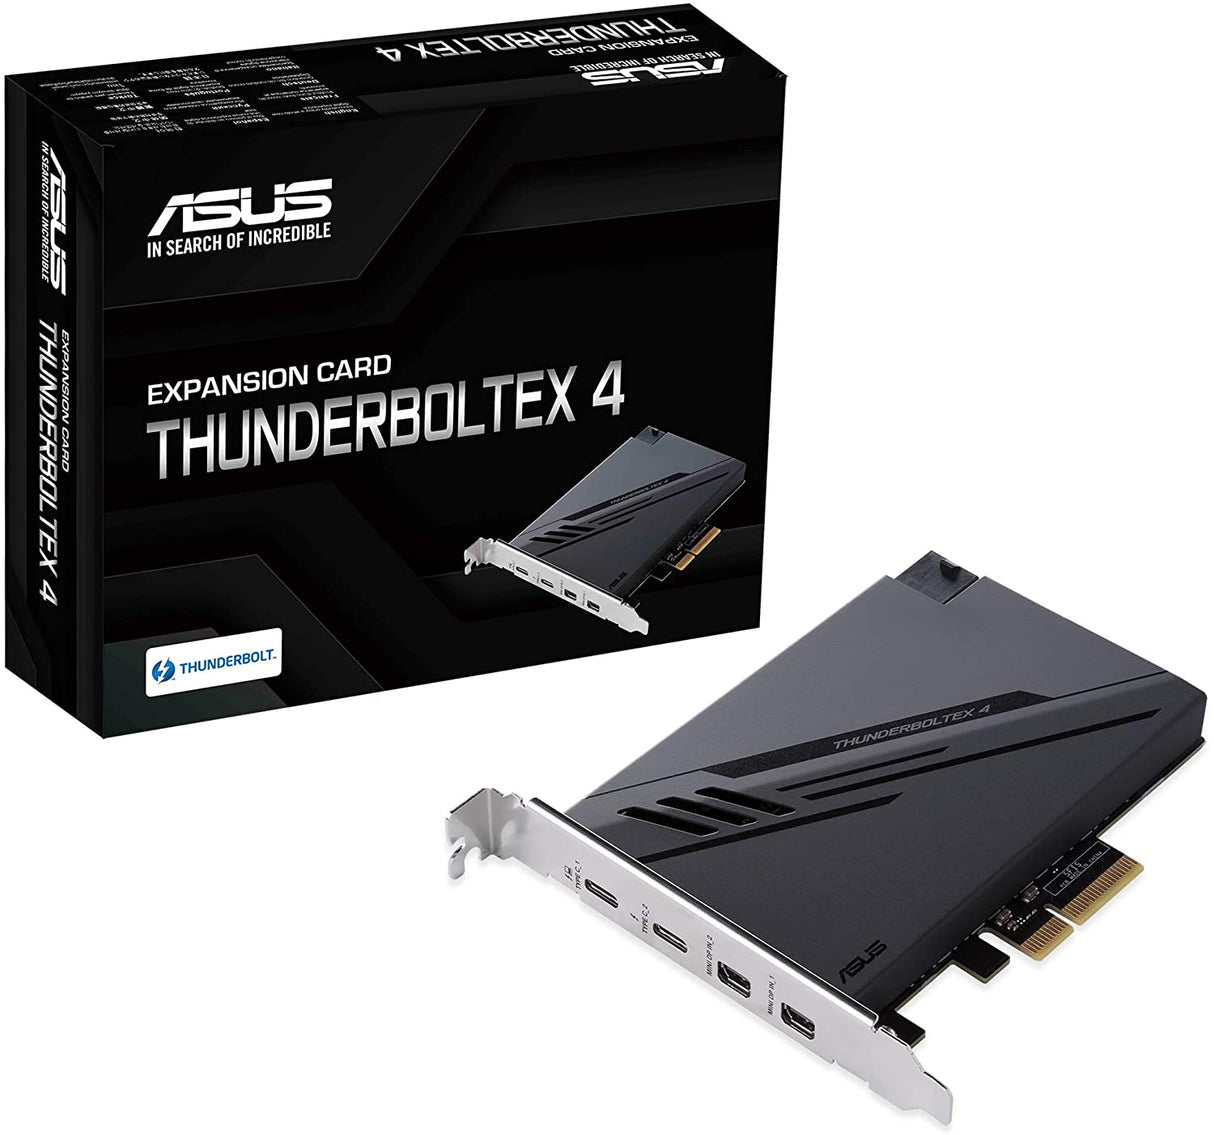 ASUS ThunderboltEX 4 with Intel® Thunderbolt™ 4 JHL 8540 Controller, 2 USB Type-C Ports, up to 40Gb/s bi-Directional Bandwidth, DisplayPort 1.4 Support, up to 100W Quick Charge.